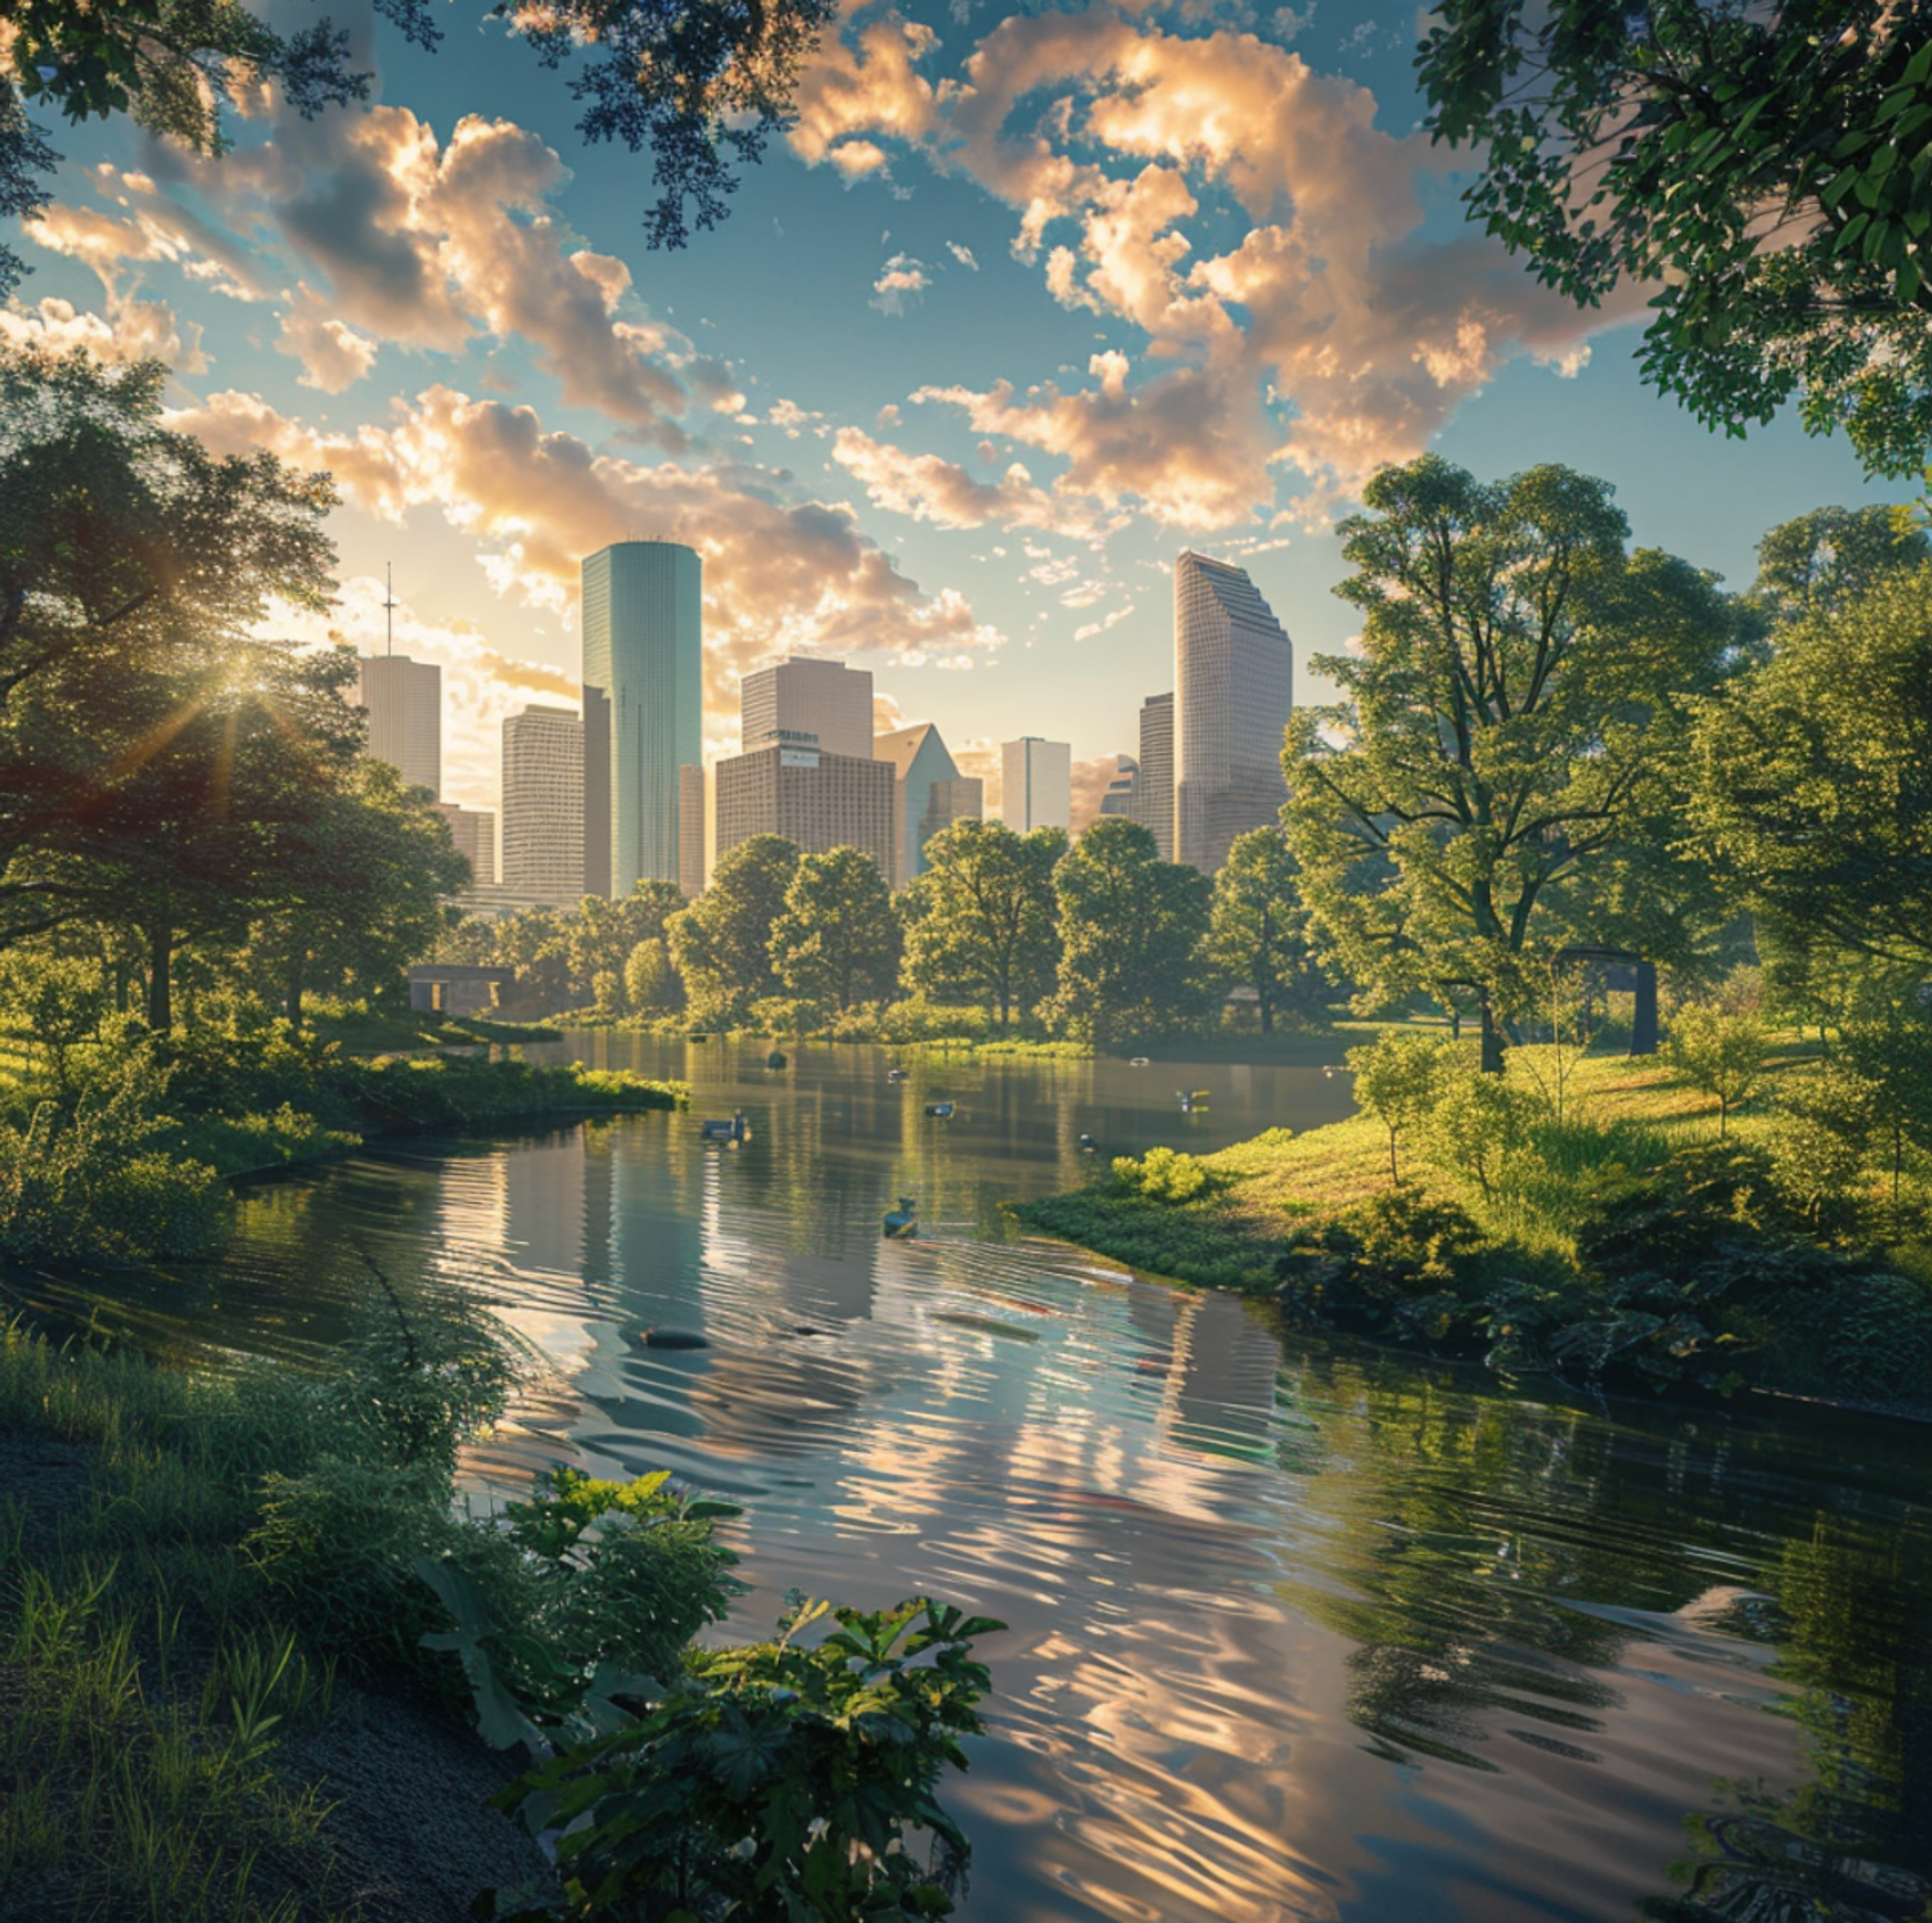 Peaceful morning in Houston, Texas, with a view of the city's skyscrapers from a lush park, sunlight filtering through the trees and reflecting on the calm waters of Buffalo Bayou, showcasing the city's blend of urban development and natural spaces.